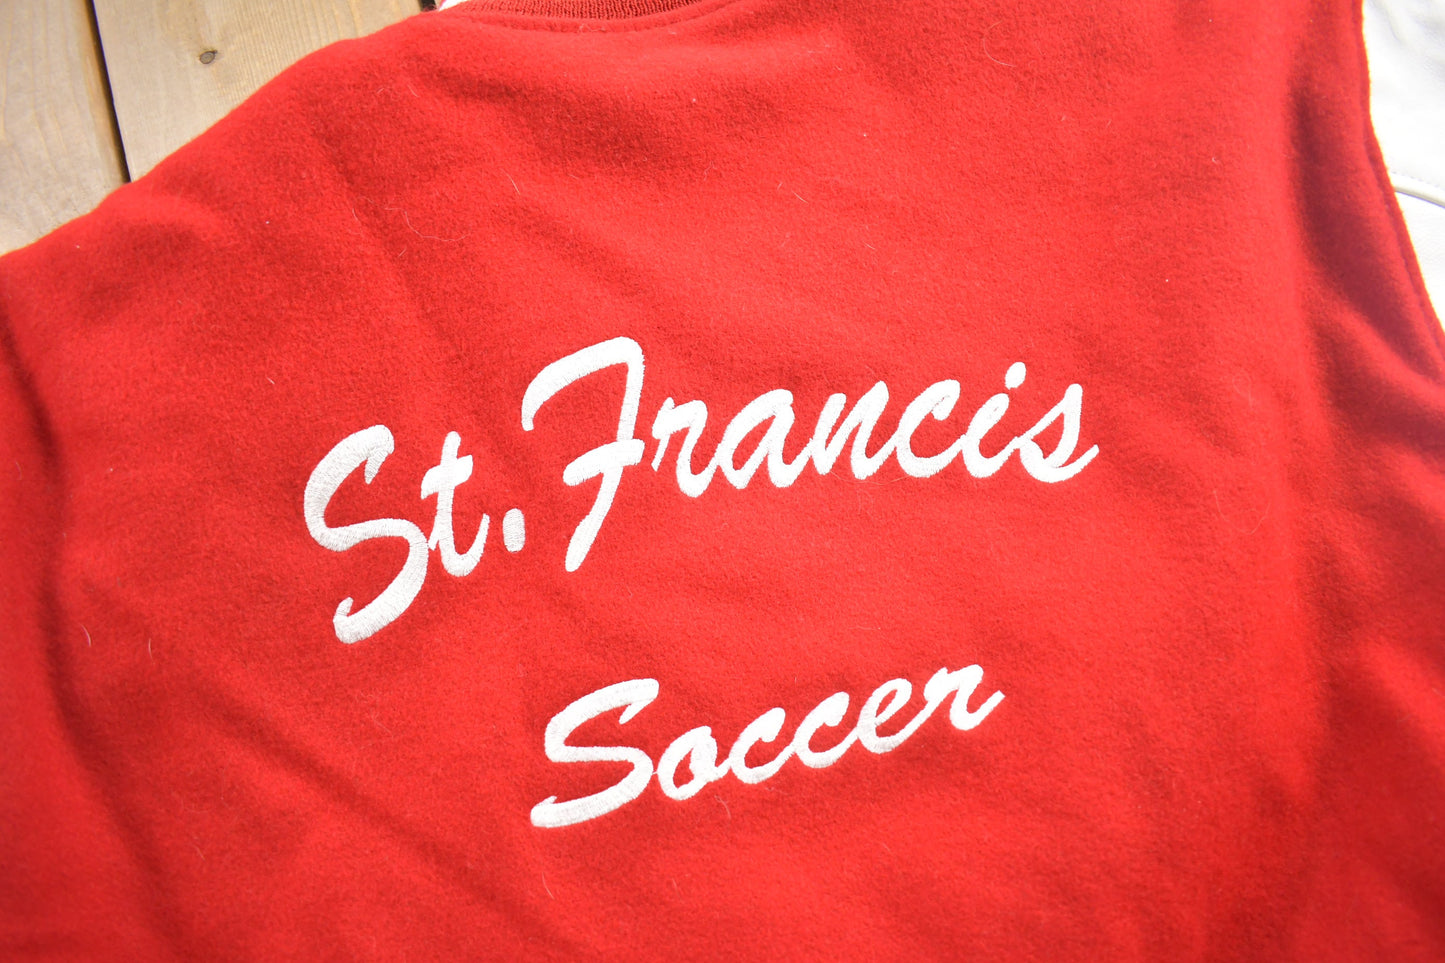 Vintage 1990s St Francis Soccer Leather Varsity Jacket / Made In USA / Red Varsity / Streetwear / Embroidered